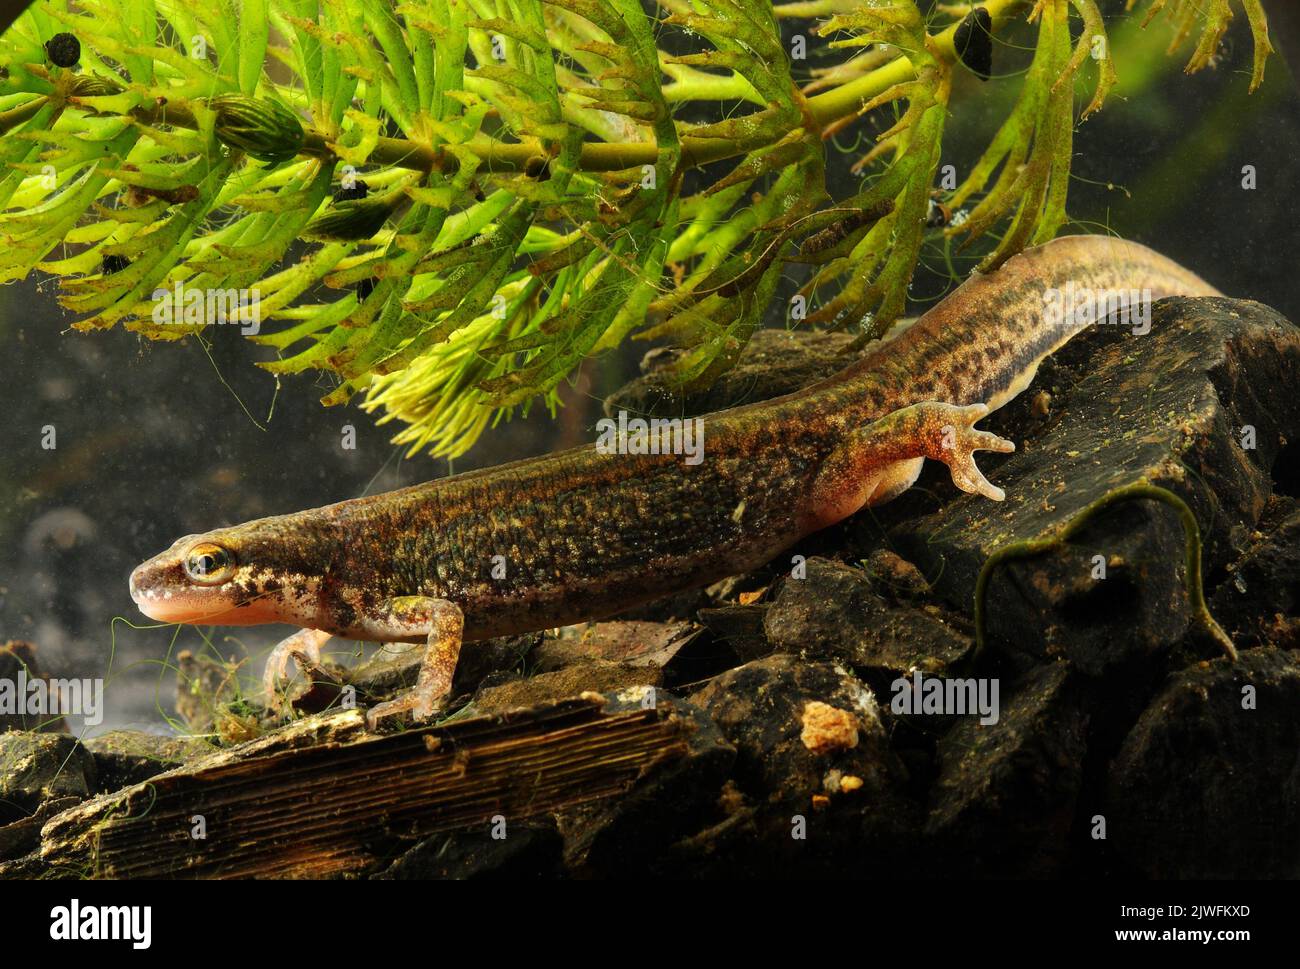 The smooth newt, European newt, northern smooth newt or common newt is a species of newt. It is widespread in Europe and parts of Asia, Stock Photo